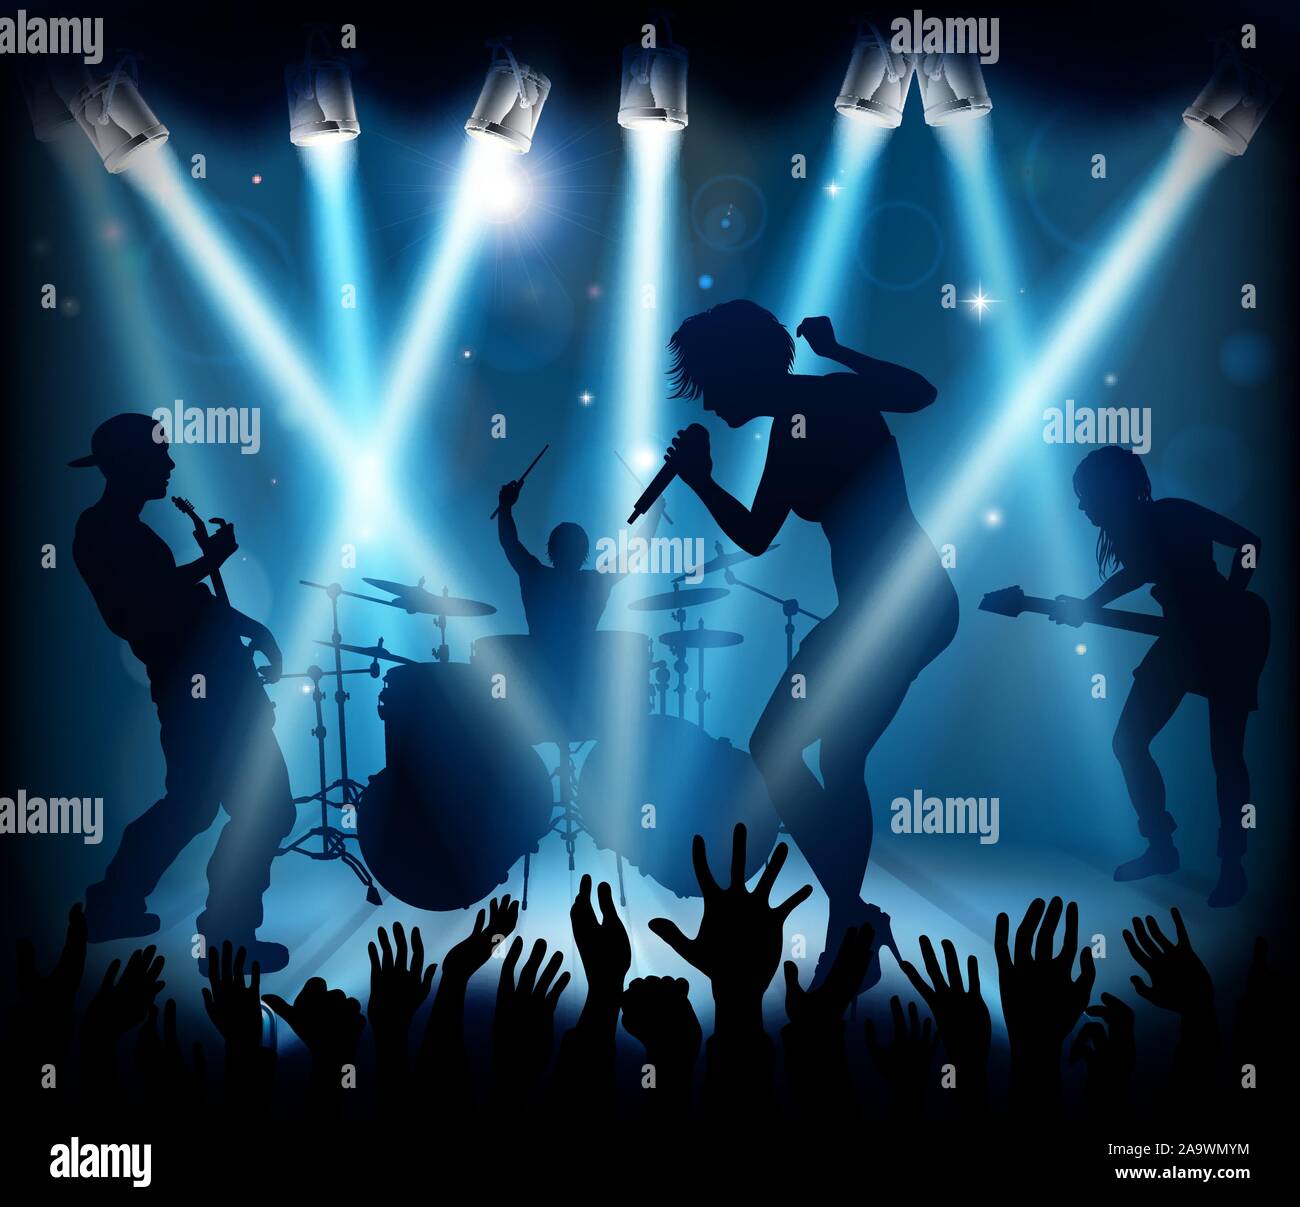 Music Concert Band Stage Silhouettes Stock Vector